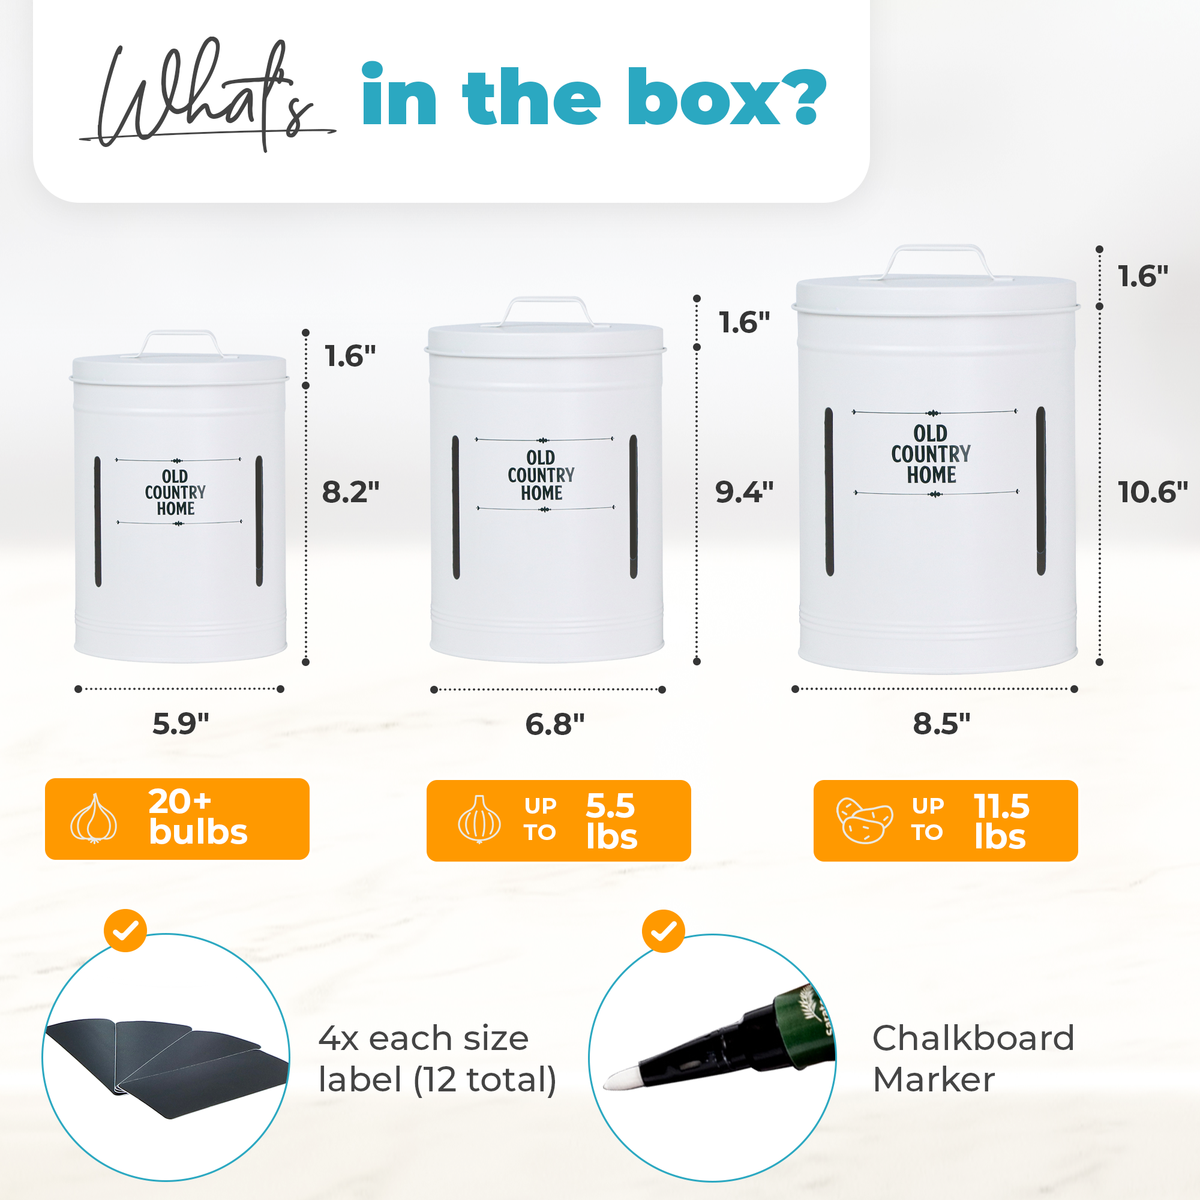 Dimensions for each White Onion and Potato Storage Bins with 12 labels (4x each size) and a chalkboard marker